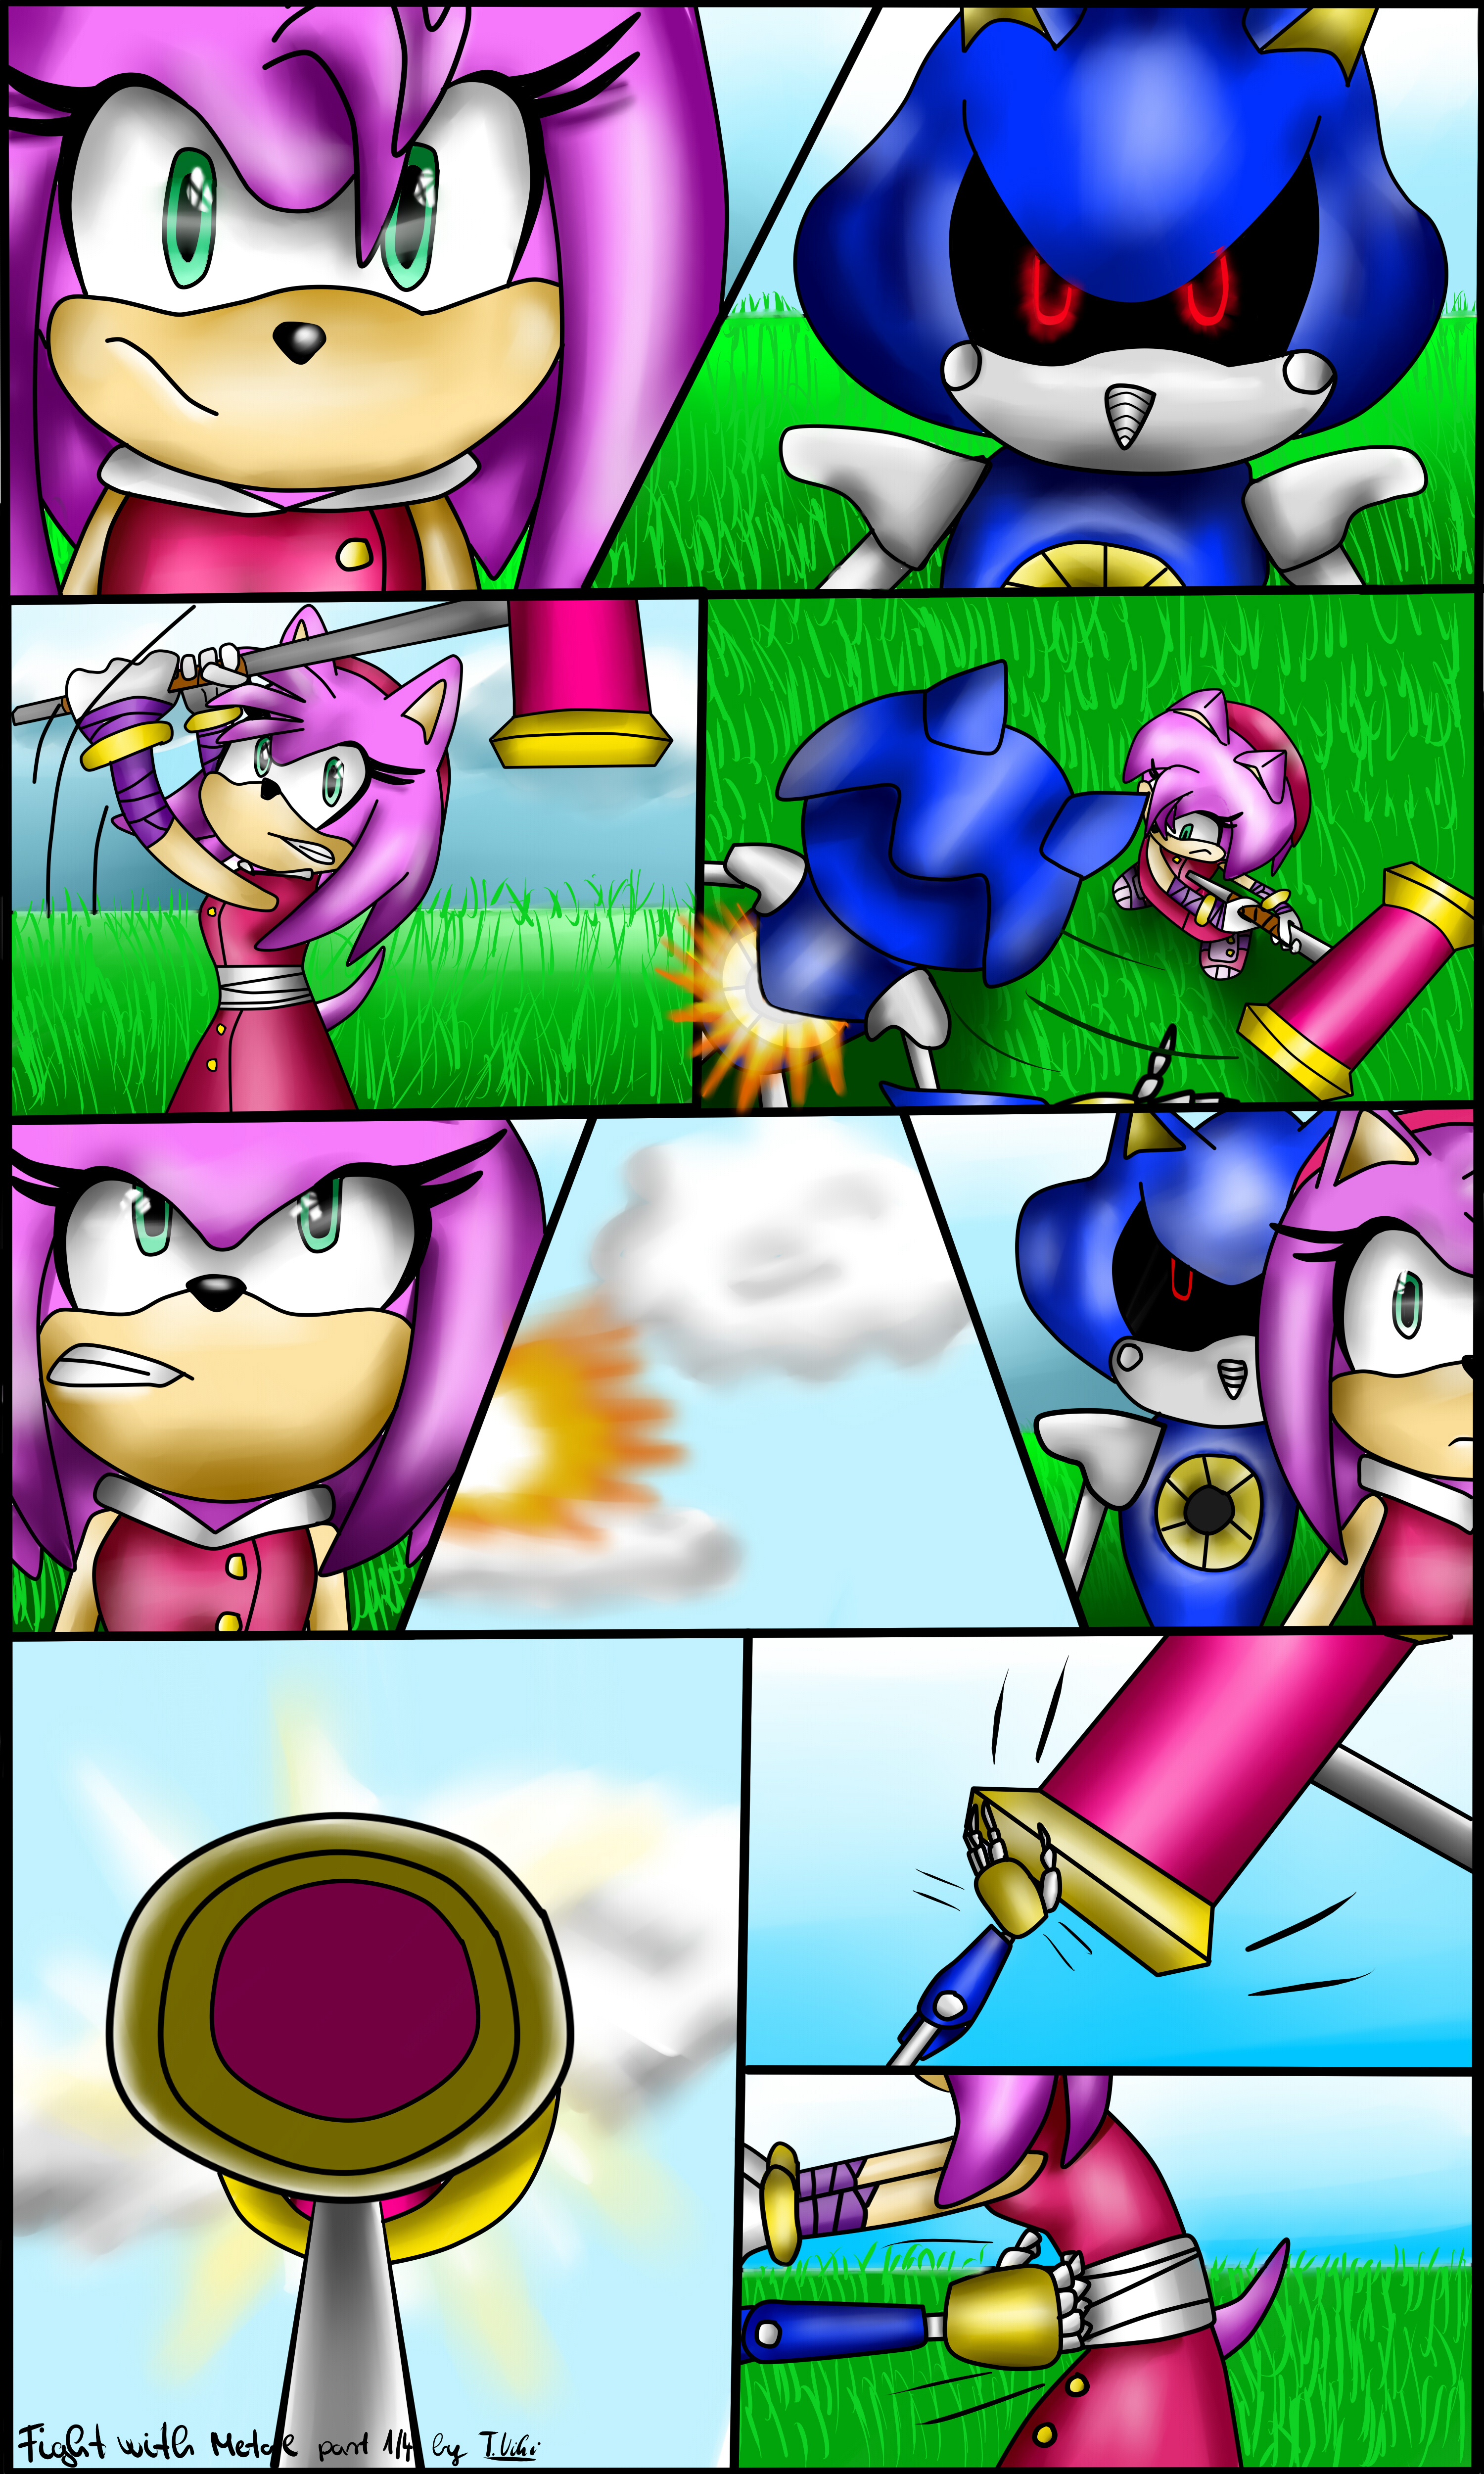 Sonamy short comic: Fight with Metal part 1/4